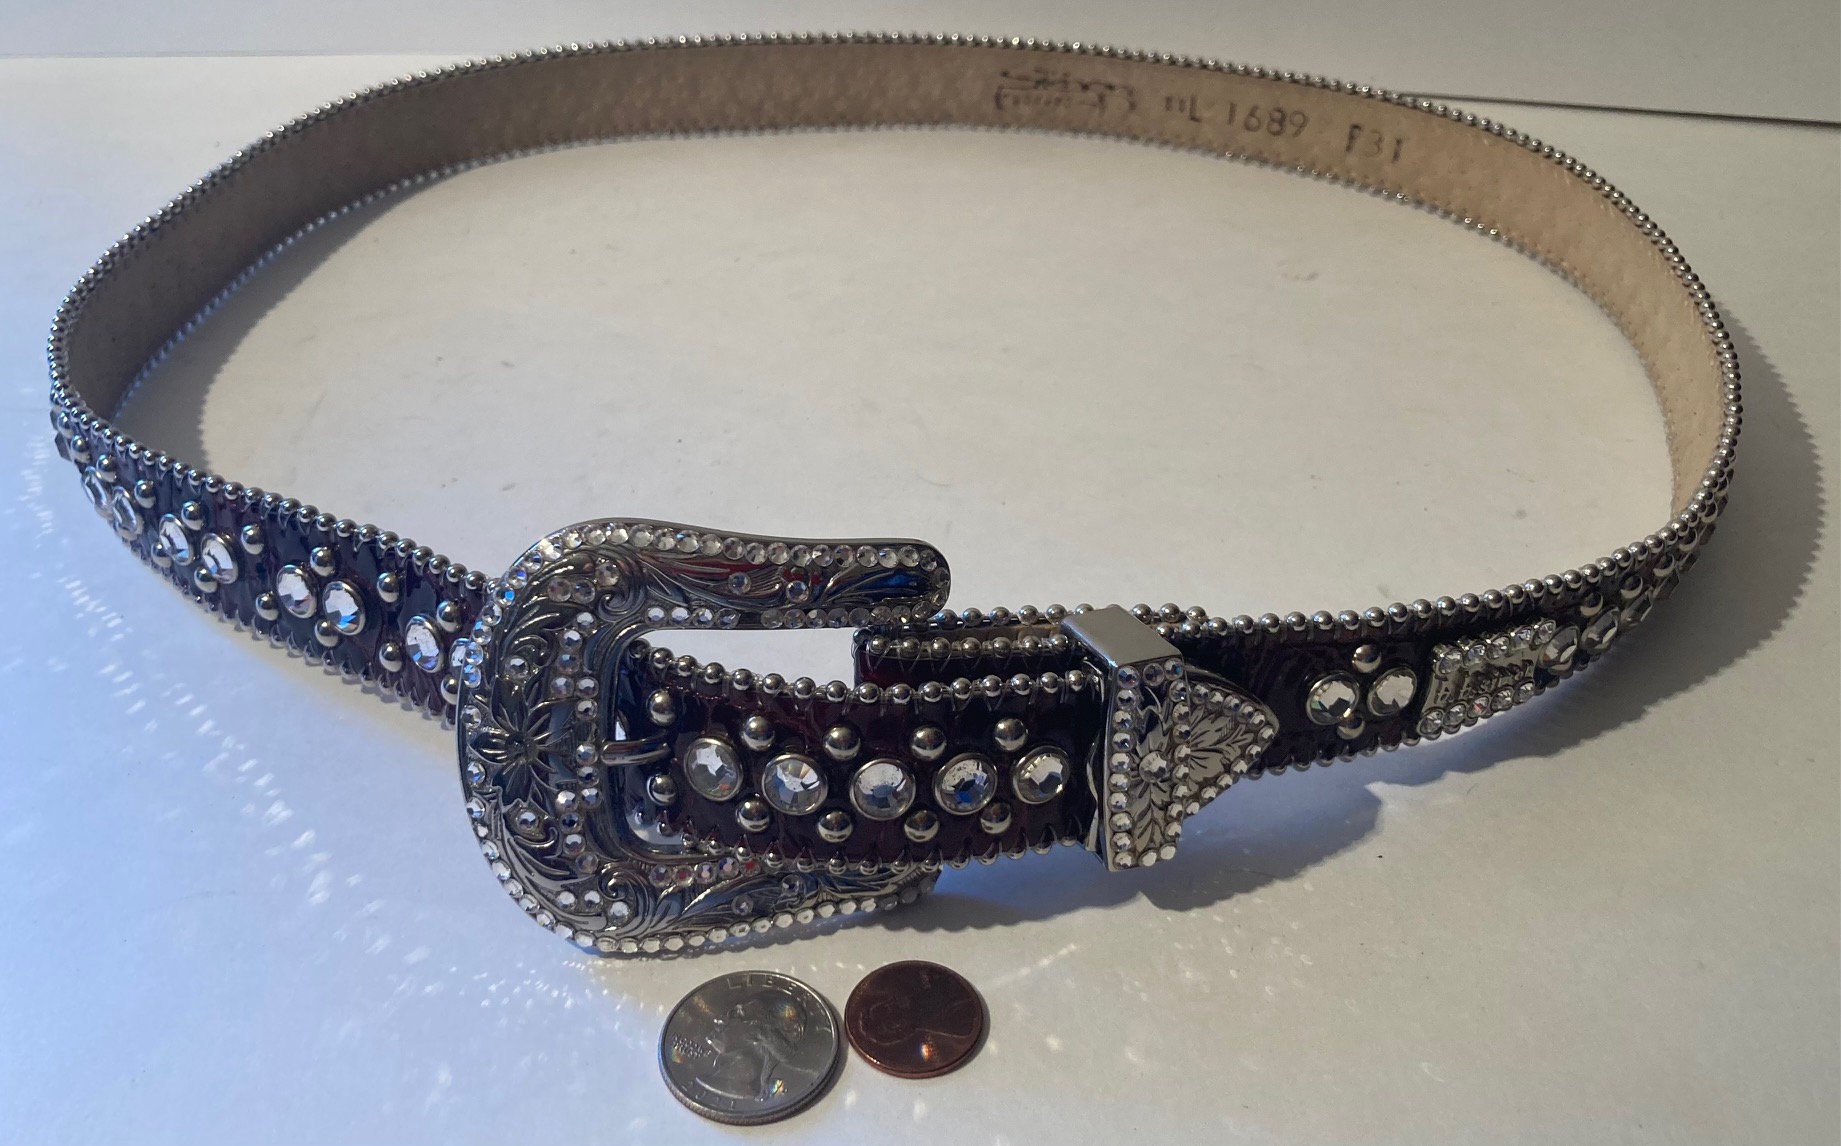 Vintage Leather Crystal Belt and Buckle, B. B. Simon, Hand Tooled, Silver,  Fully Loaded, So Nice, Belts, Quality, Hand Made in USA